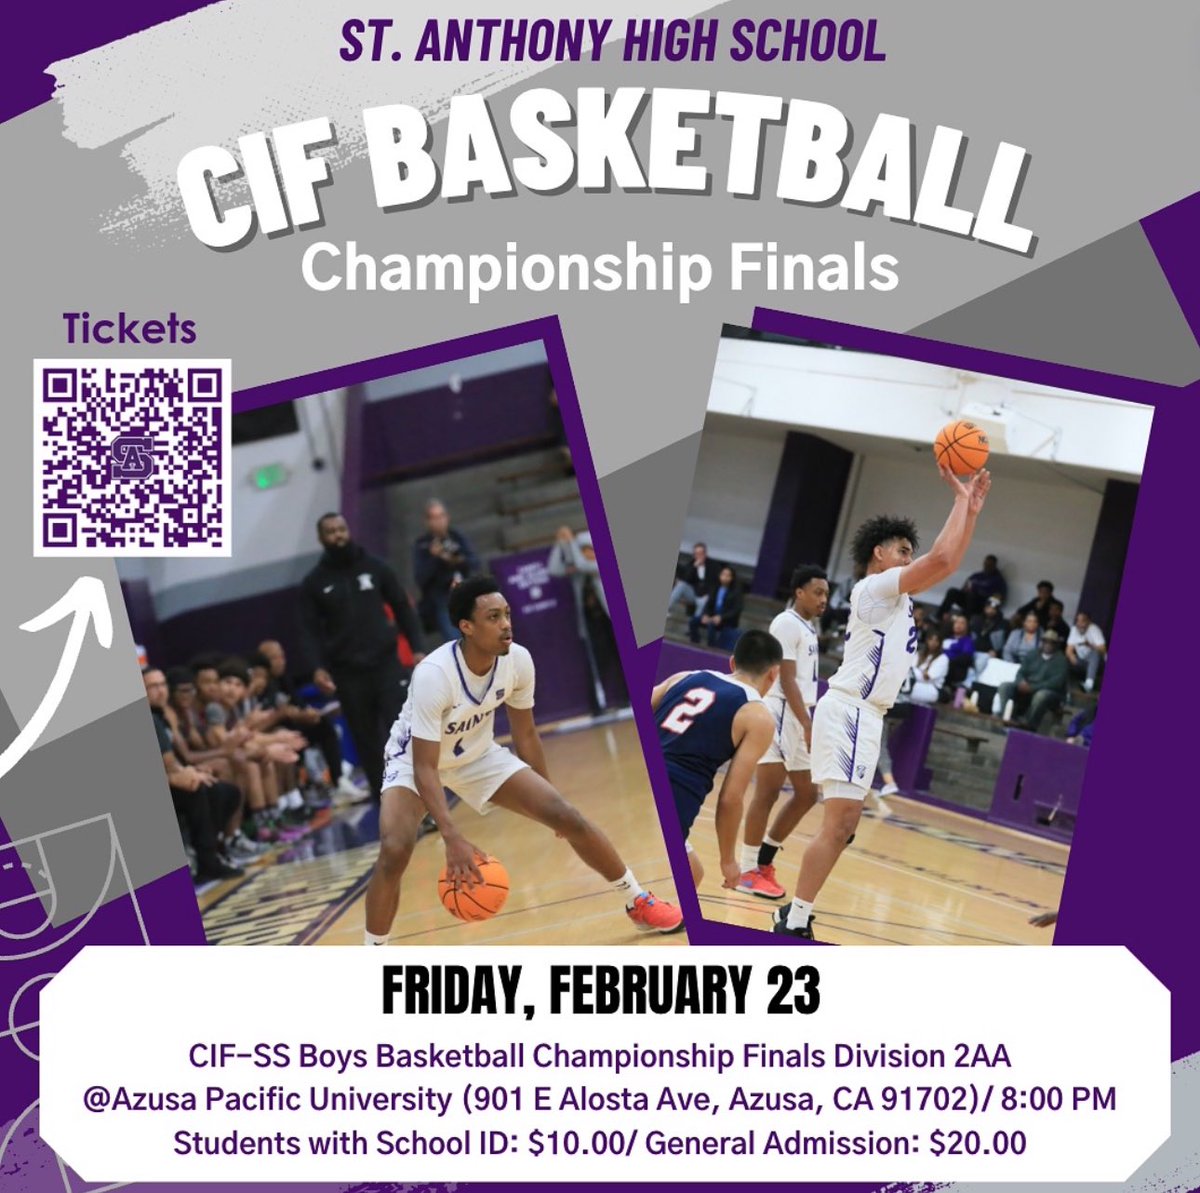 Are you doing anything Friday night? 🏀